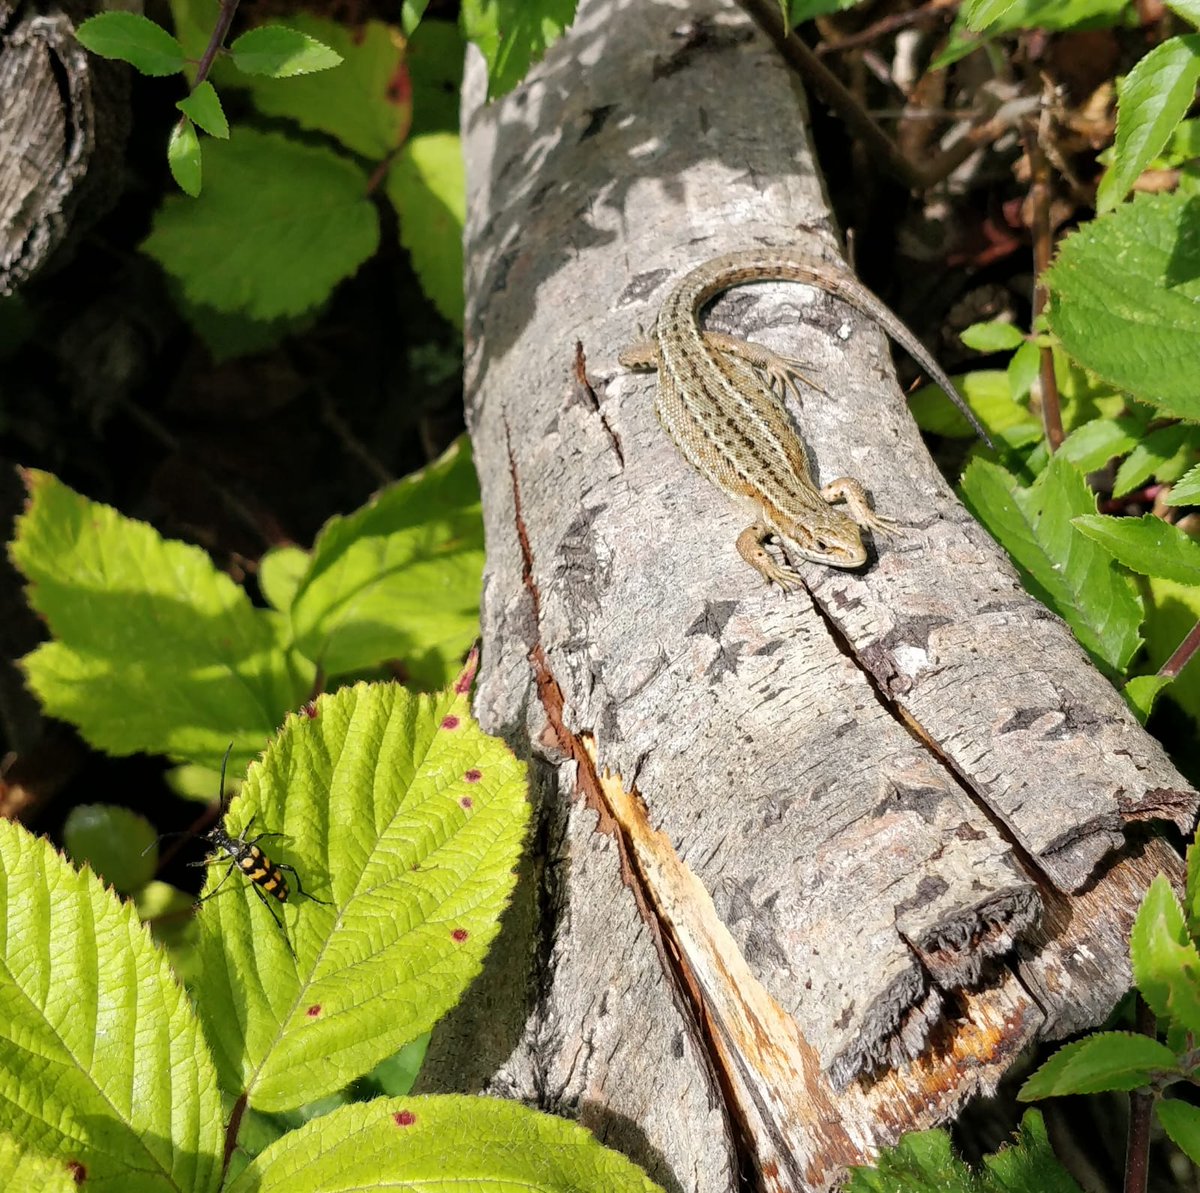 My partner snapped this pic at the weekend and didn't want to post it herself, not being overly keen on the social platforms. She gave permission for me to post it instead. Leptura quadrifasciata and a Common Lizard. Smashing picture @NLonghornRS @ColSocBI @ARC_Bytes